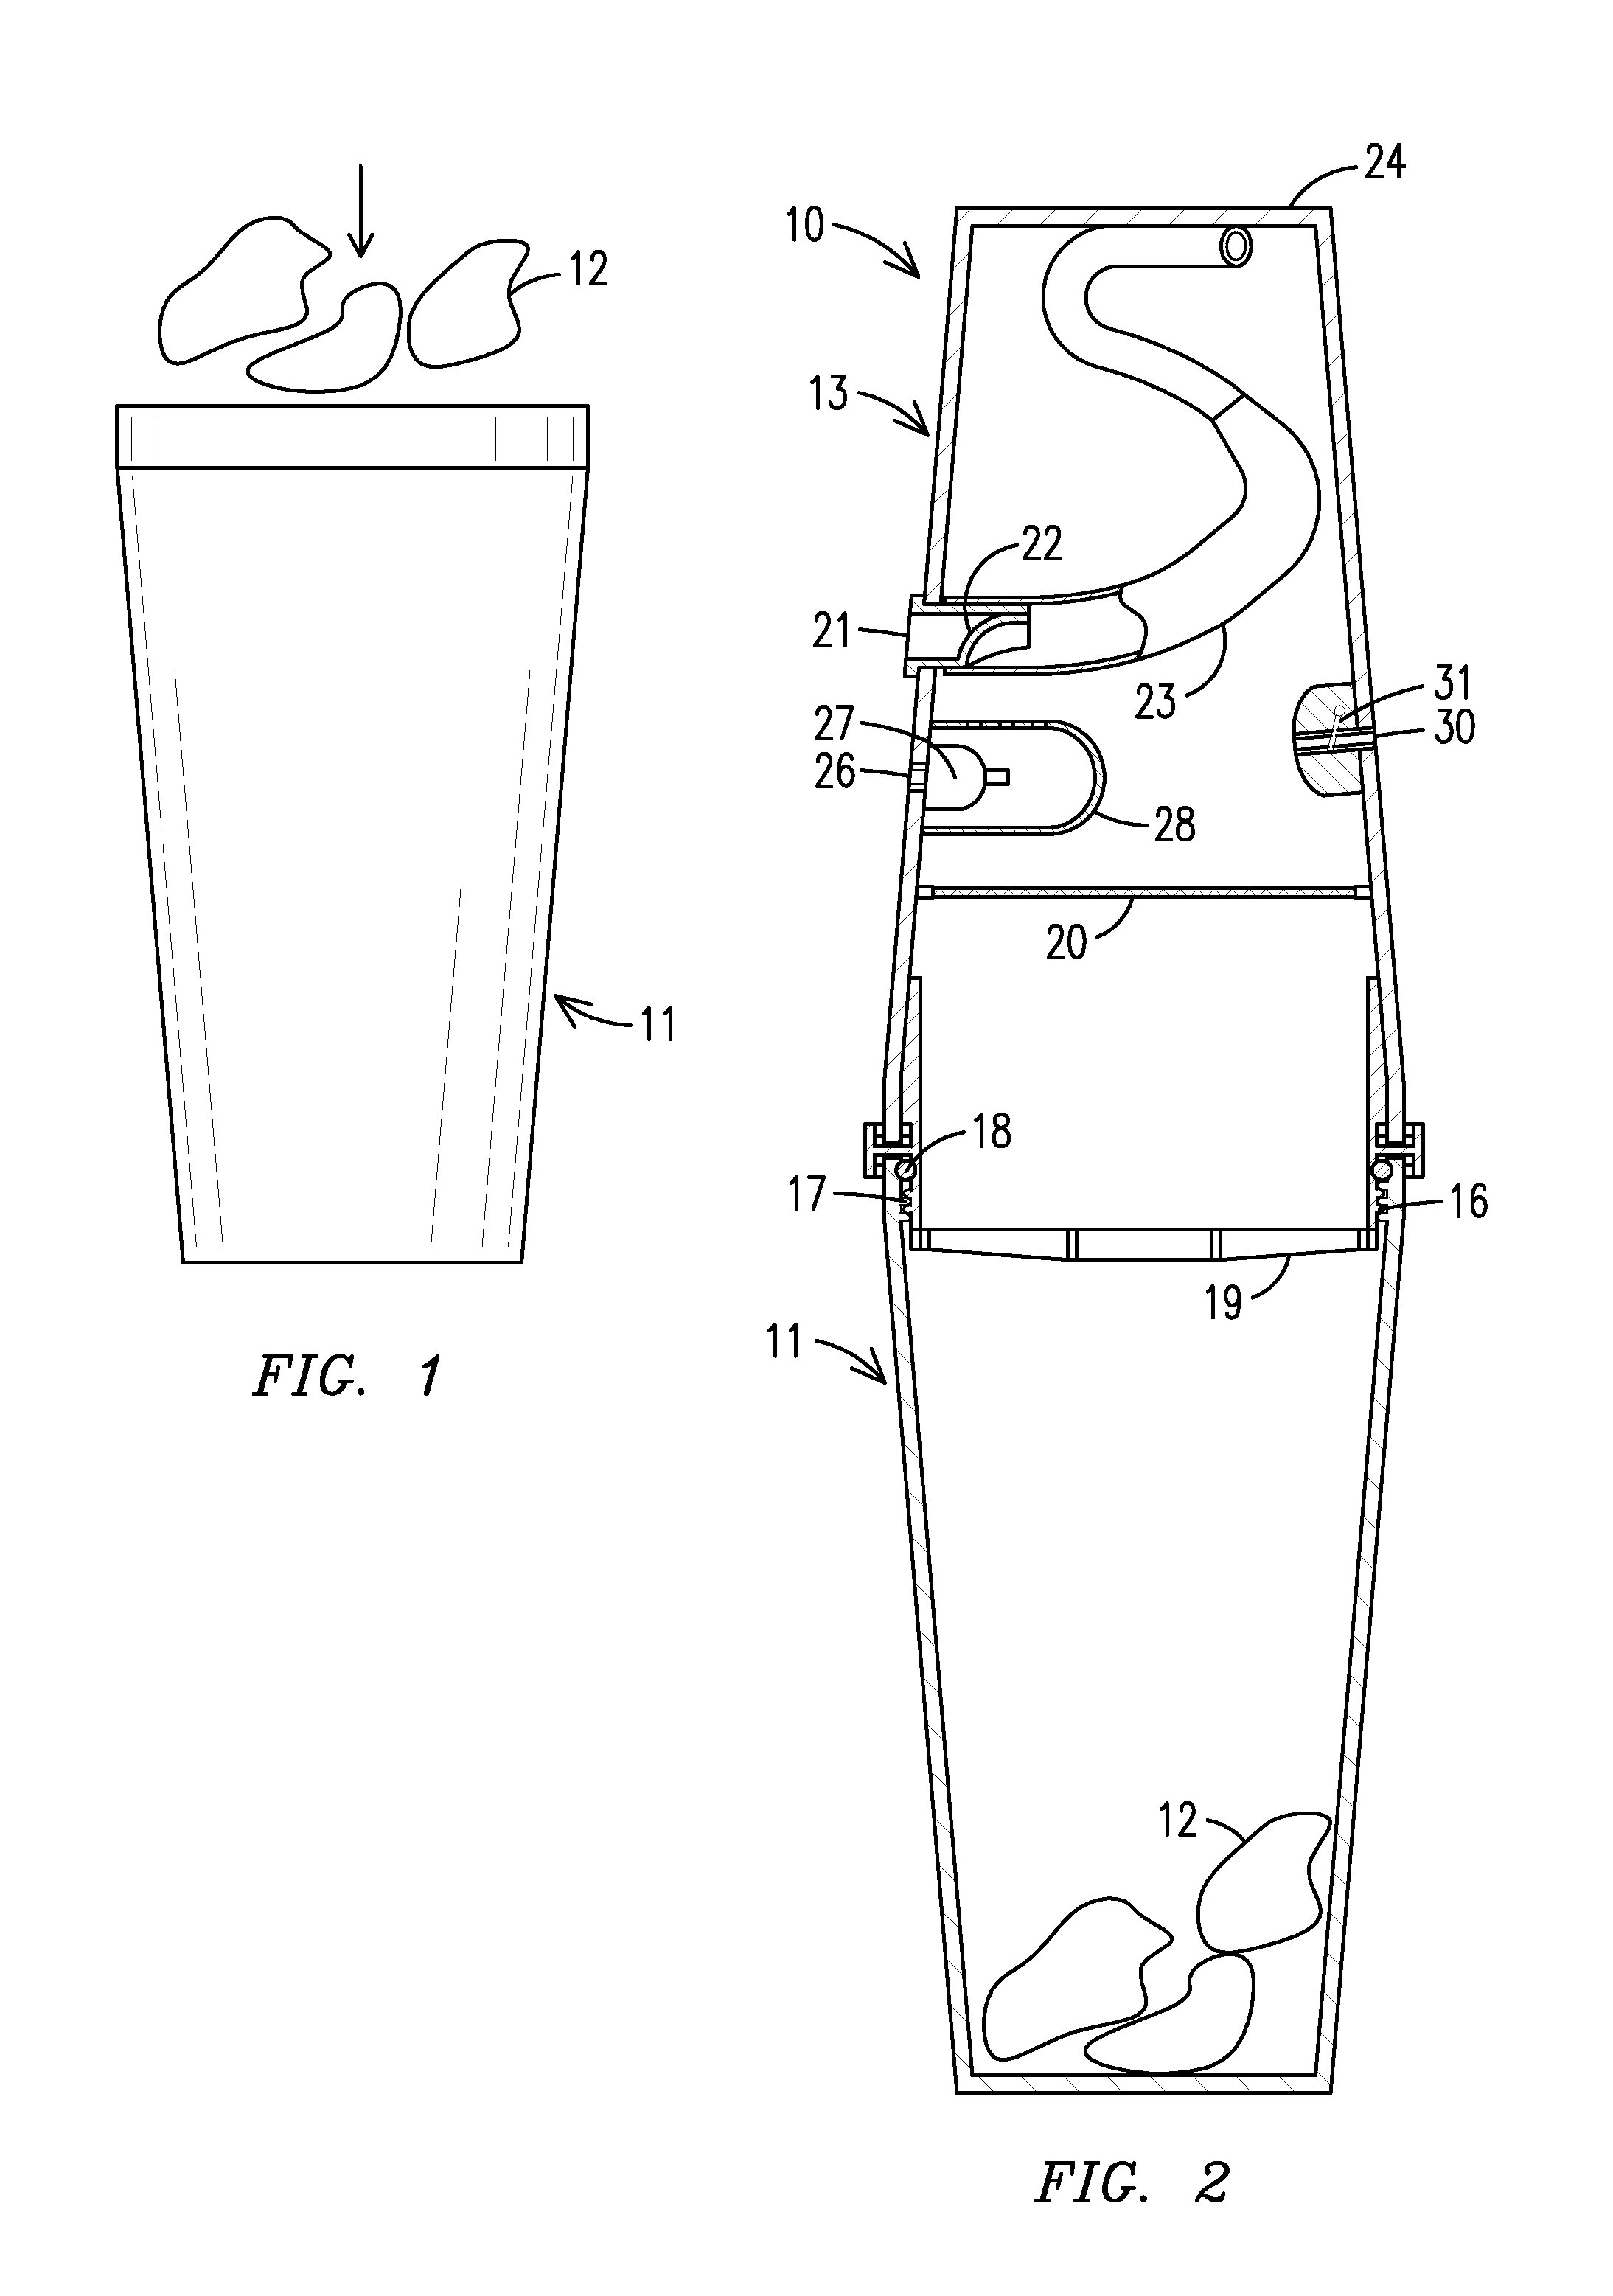 Fecal microbiome transplant material preparation method and apparatus